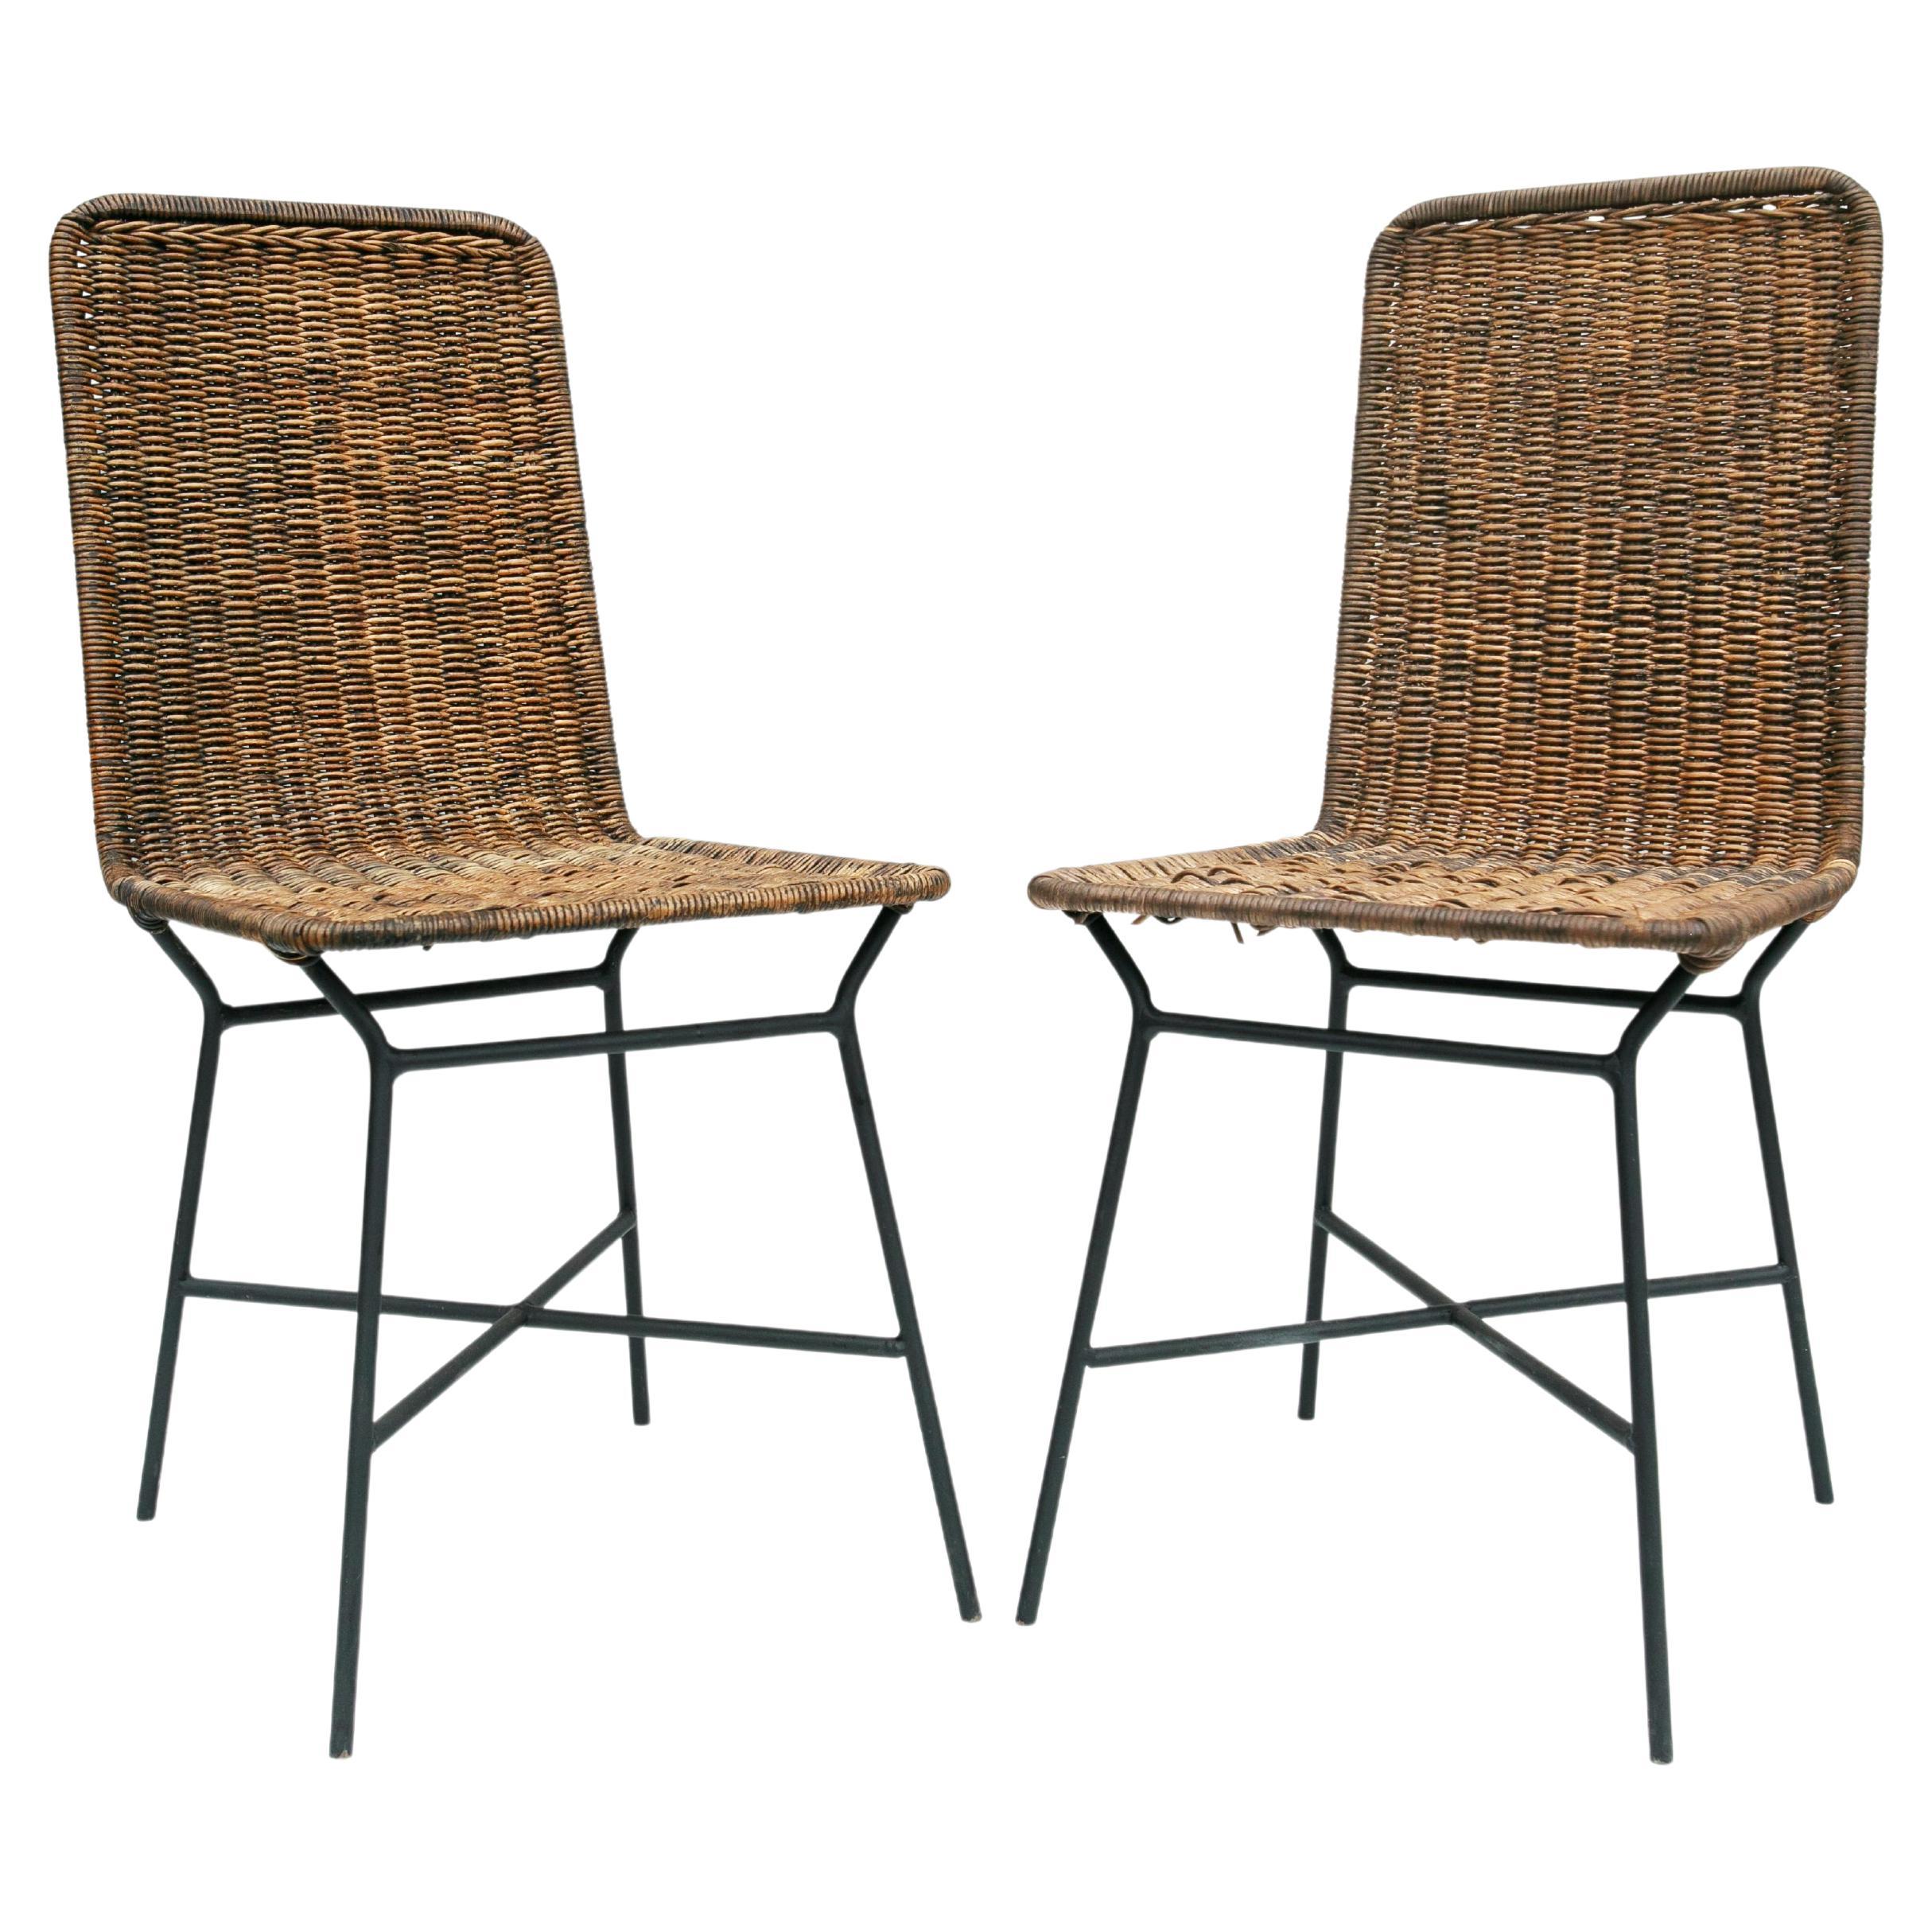 Brazilian Modern Chairs in Caning and Metal by Carlo Hauner, 1950s, Brazil For Sale